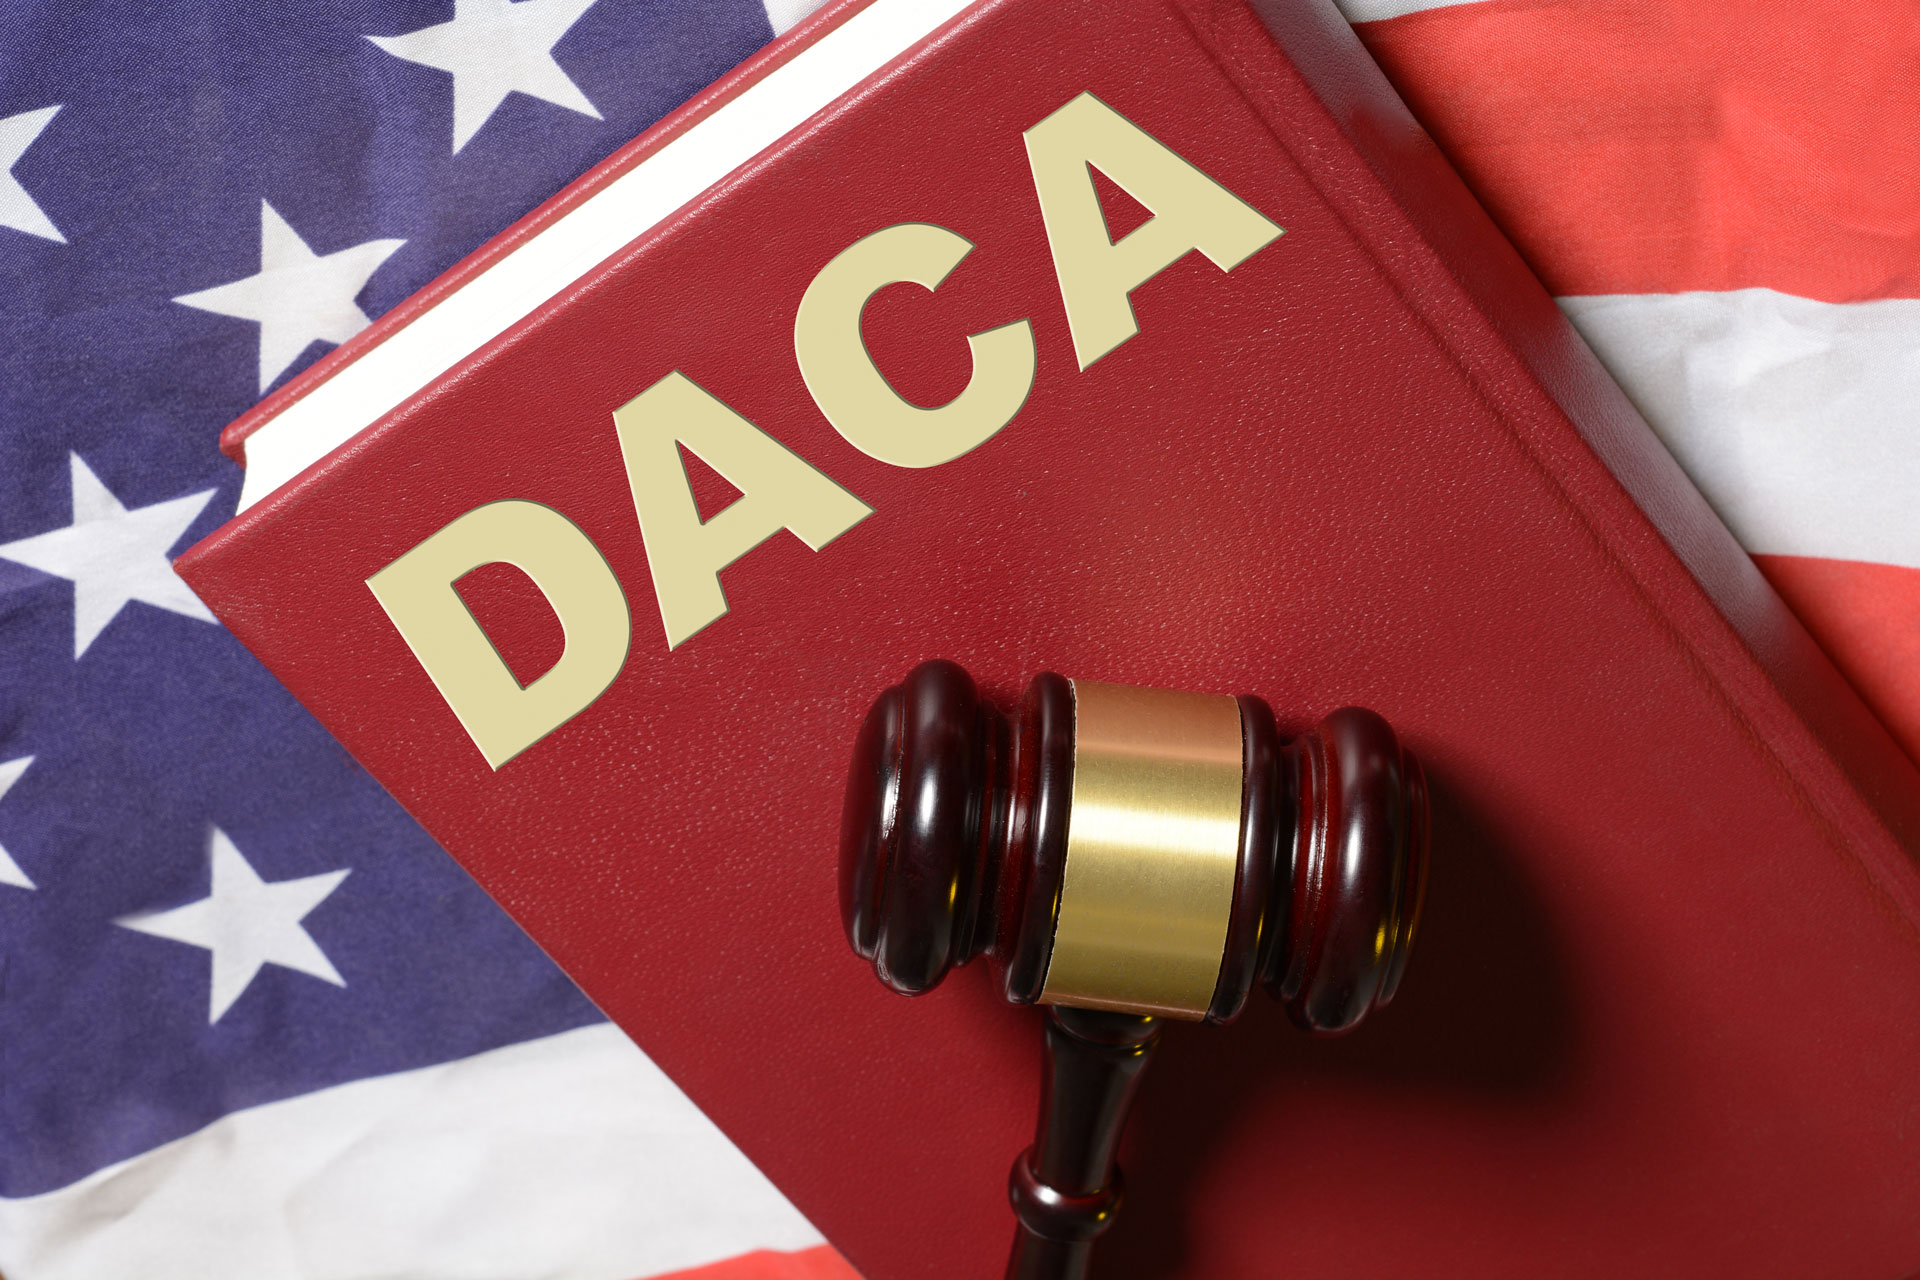 DACA program red book with a gavel on top over USA flag